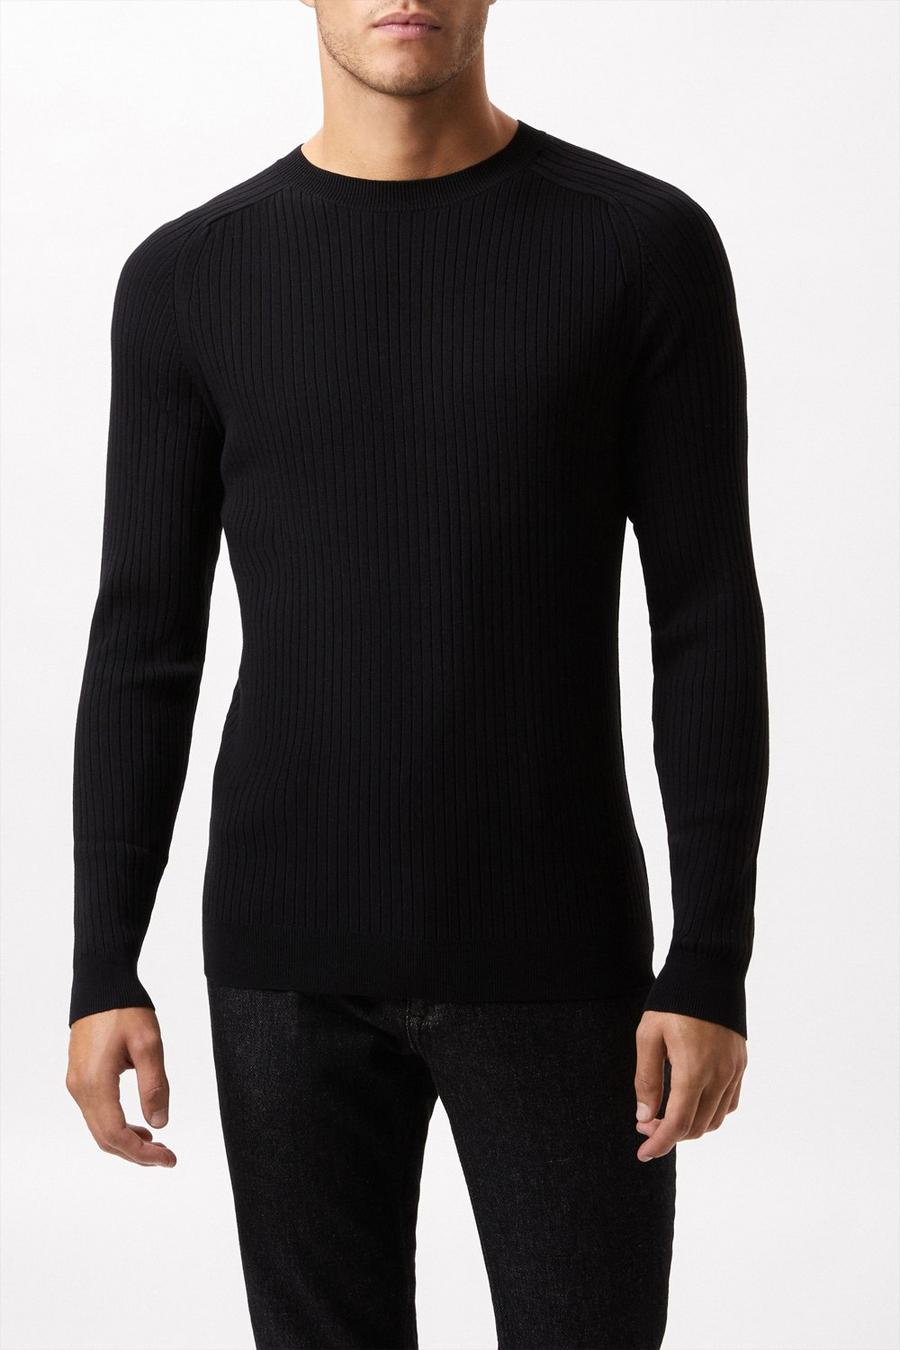 Premium Black Muscle Fit Knitted Rib Crew Neck